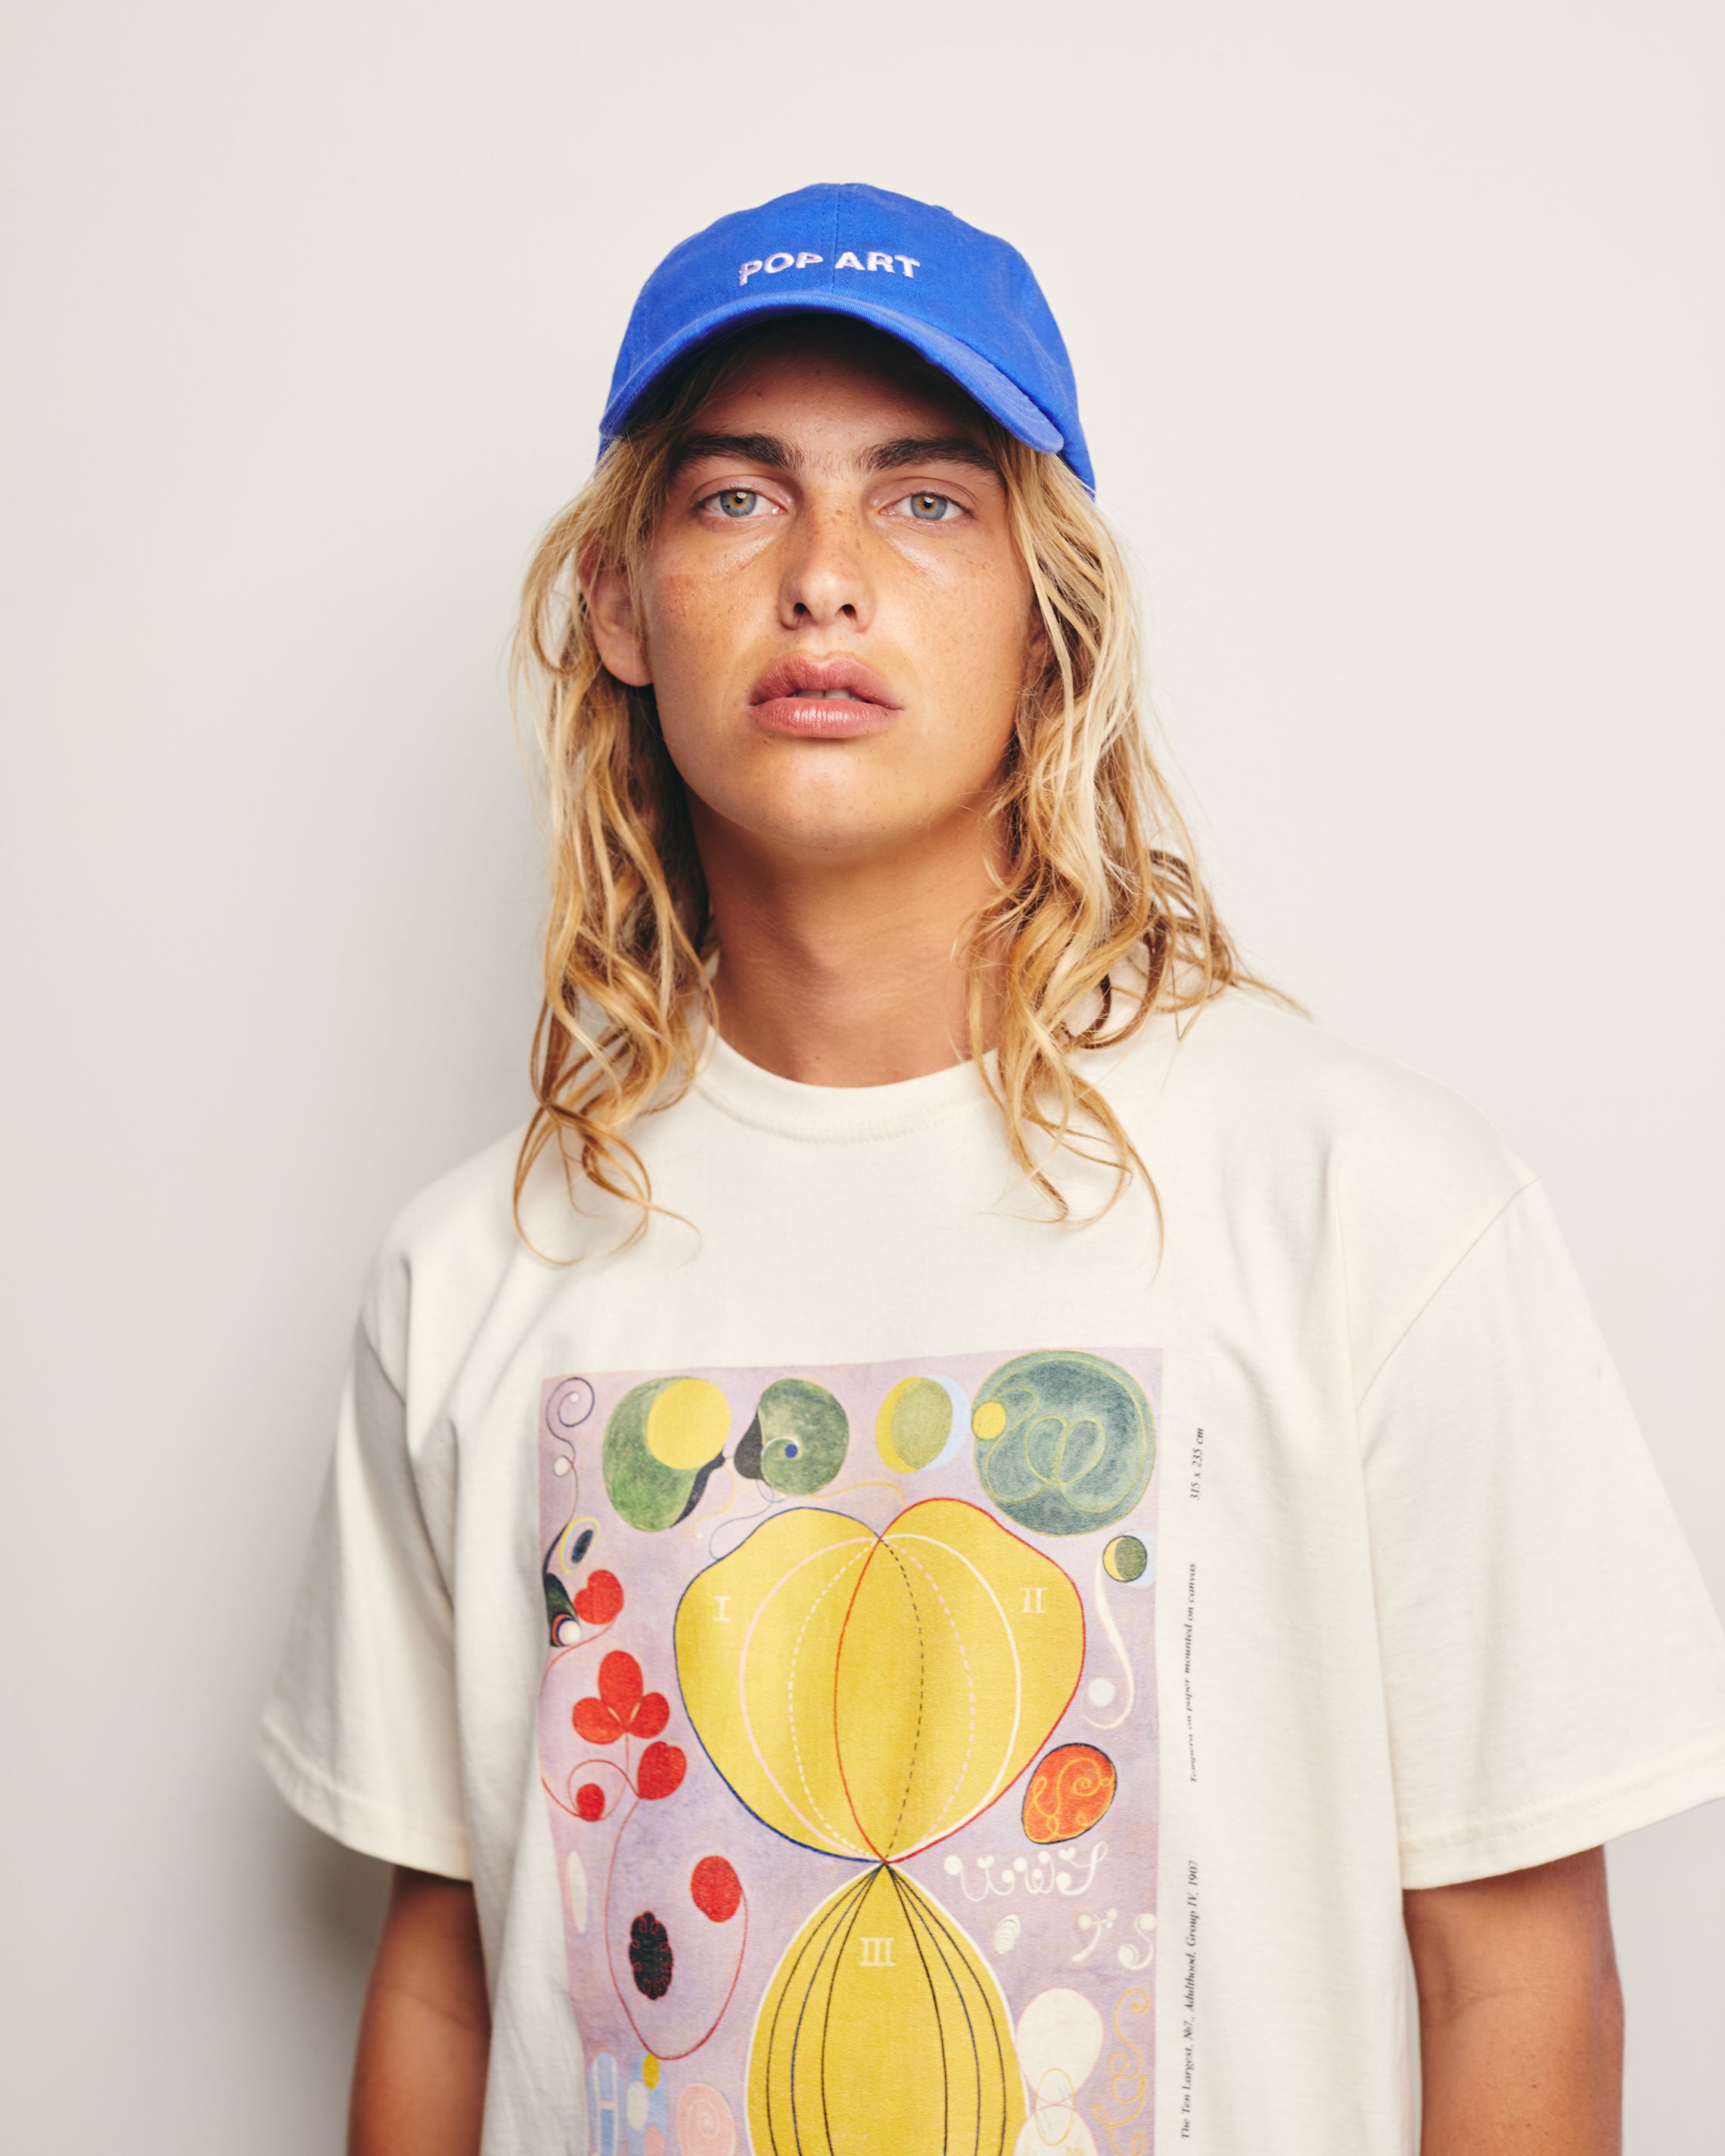 Lucas Ucedo Wears Royal Blue Dad Hat with White Pop Art Embroidery and 100% Organic Cotton Off White Tee with Hilma af Klint Abstract Expressionism Painting Graphic Print The Ten Largest